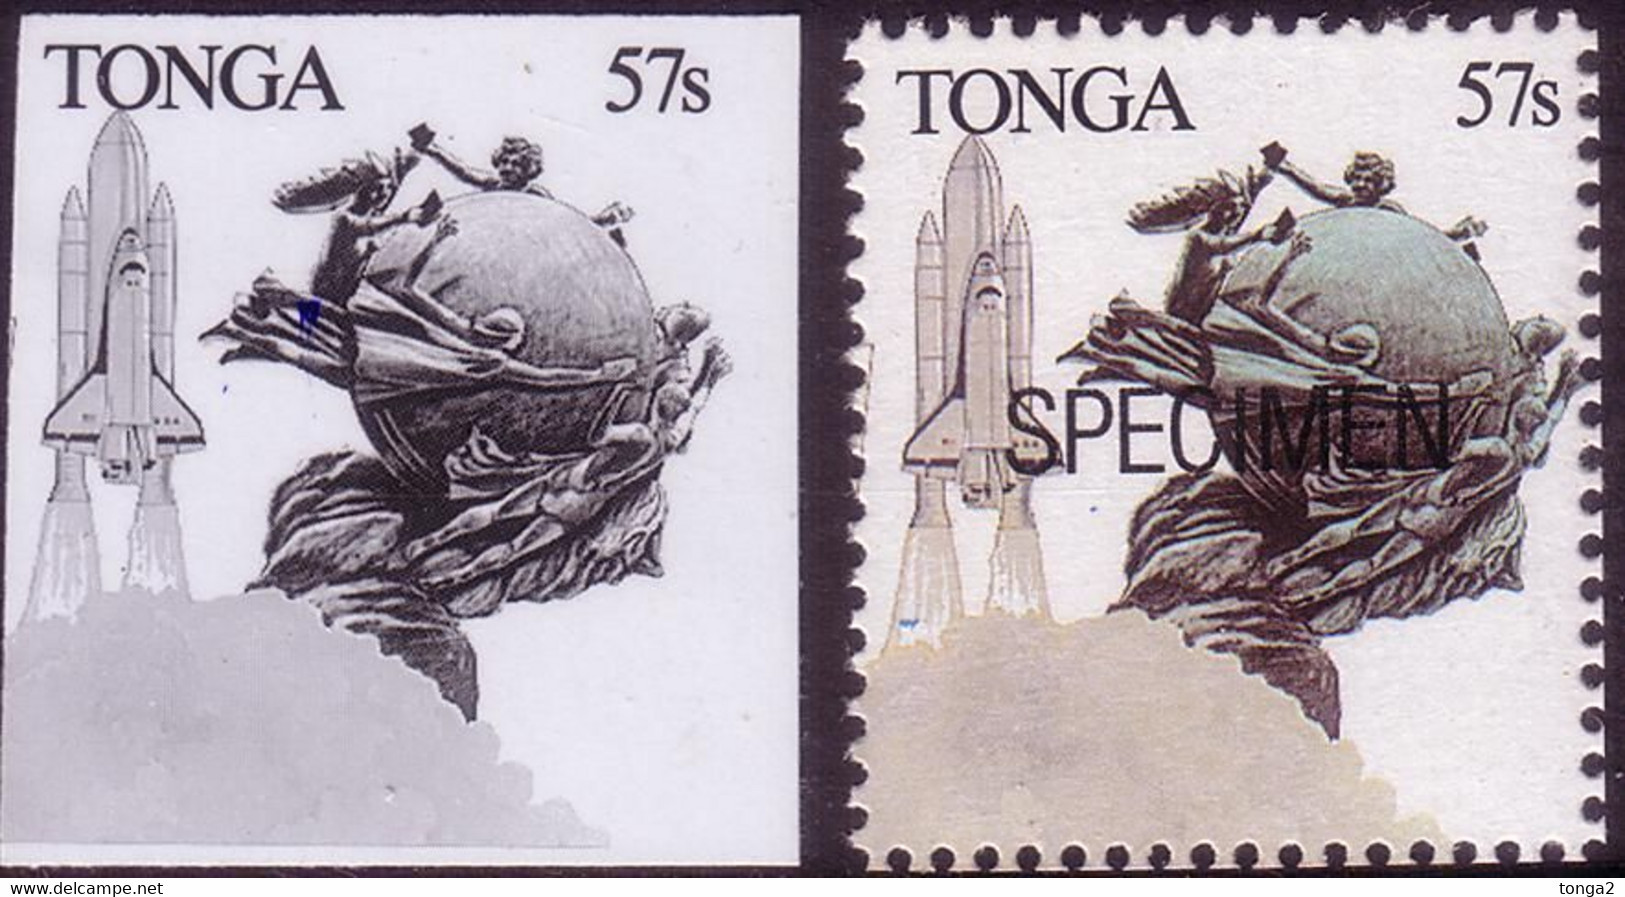 Tonga 1989 - Space Shuttle - Proof In Black & White On Thin Card + Specimen - Océanie